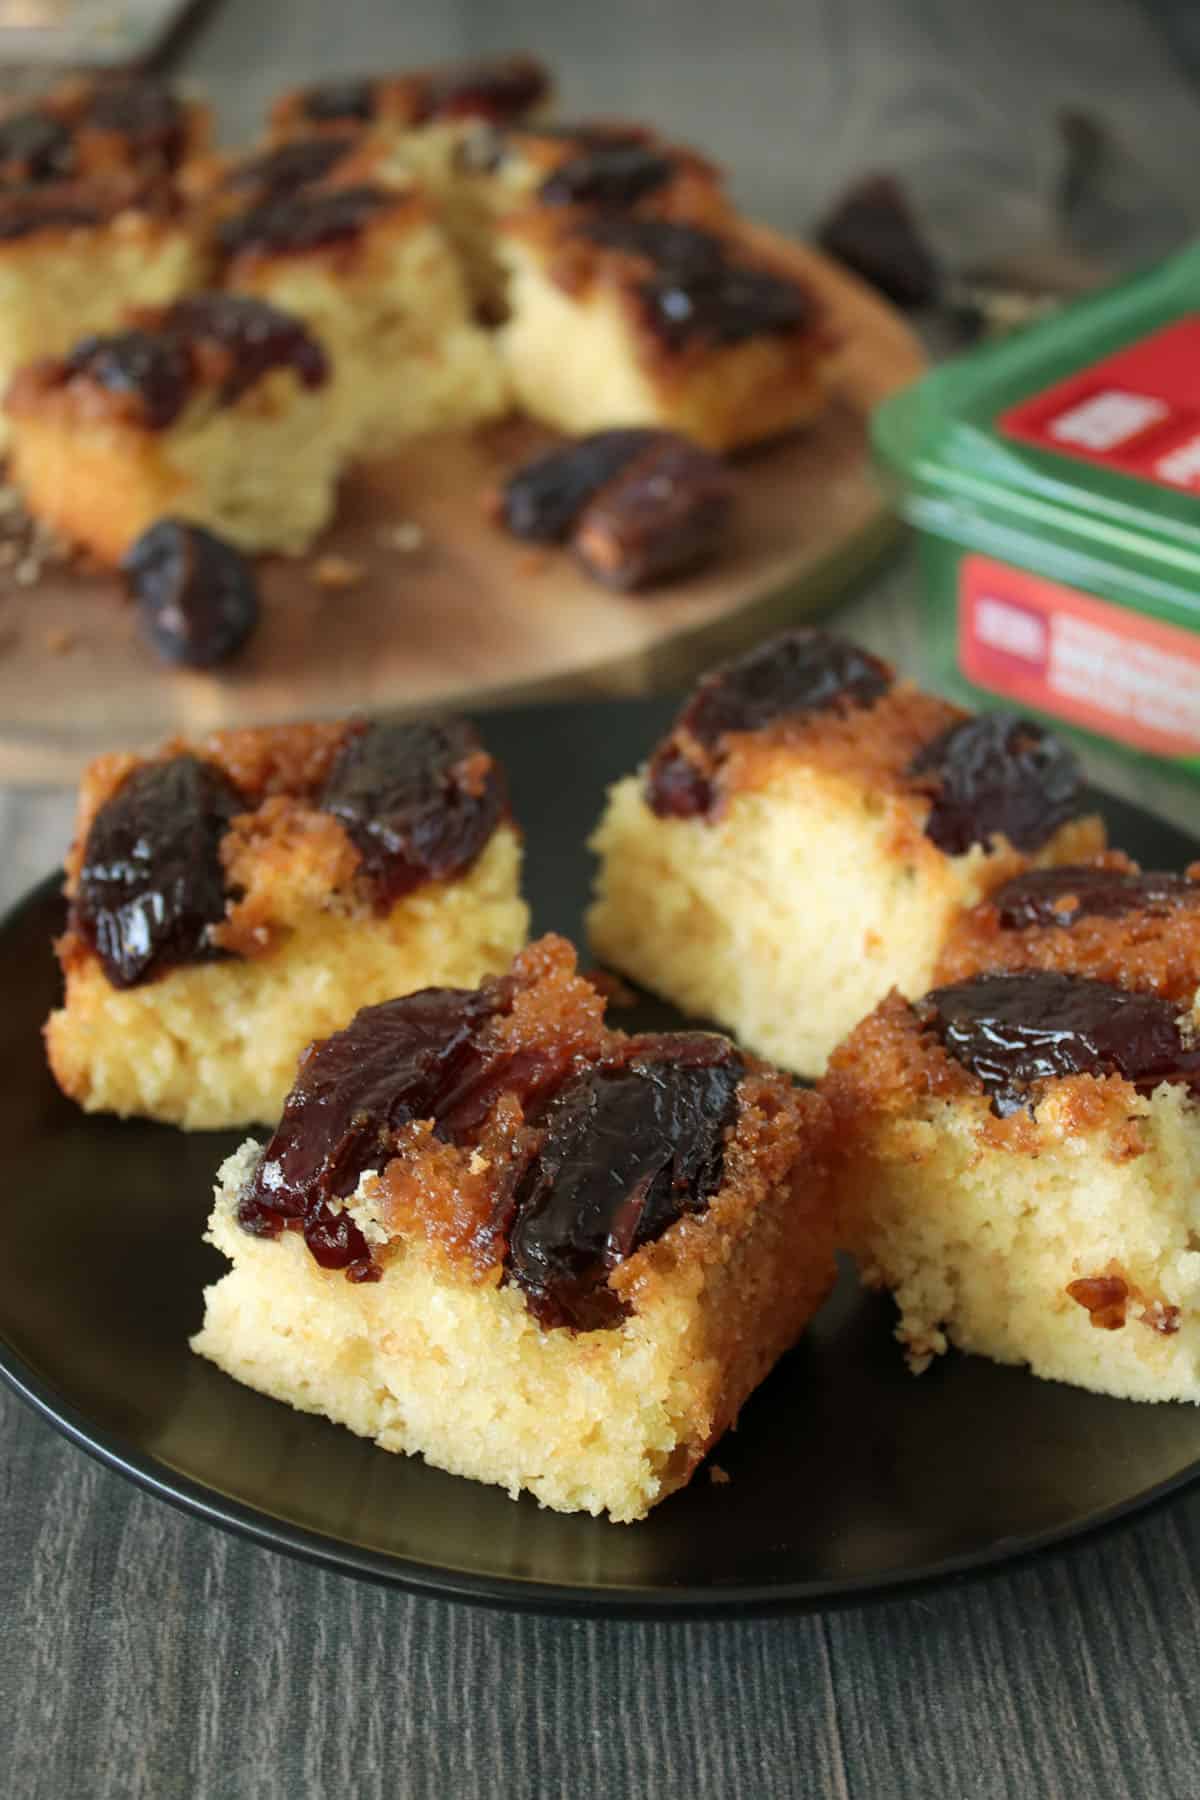 Medjool date coffee cake sliced into squares, served in a plate.